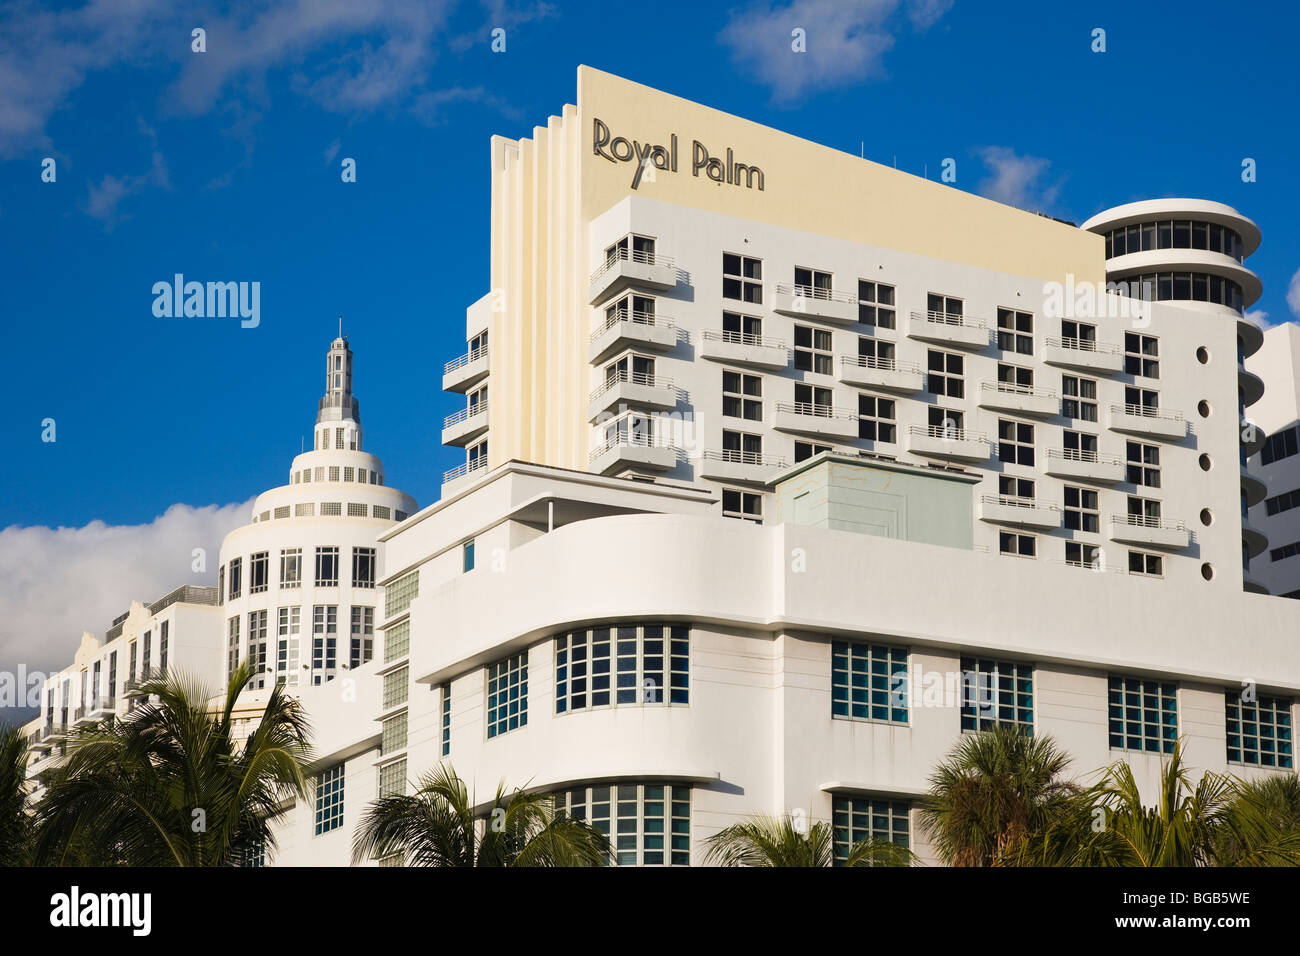 Royal Palm hotel and other buildings, South Beach, MIami, FL, USA Stock Photo